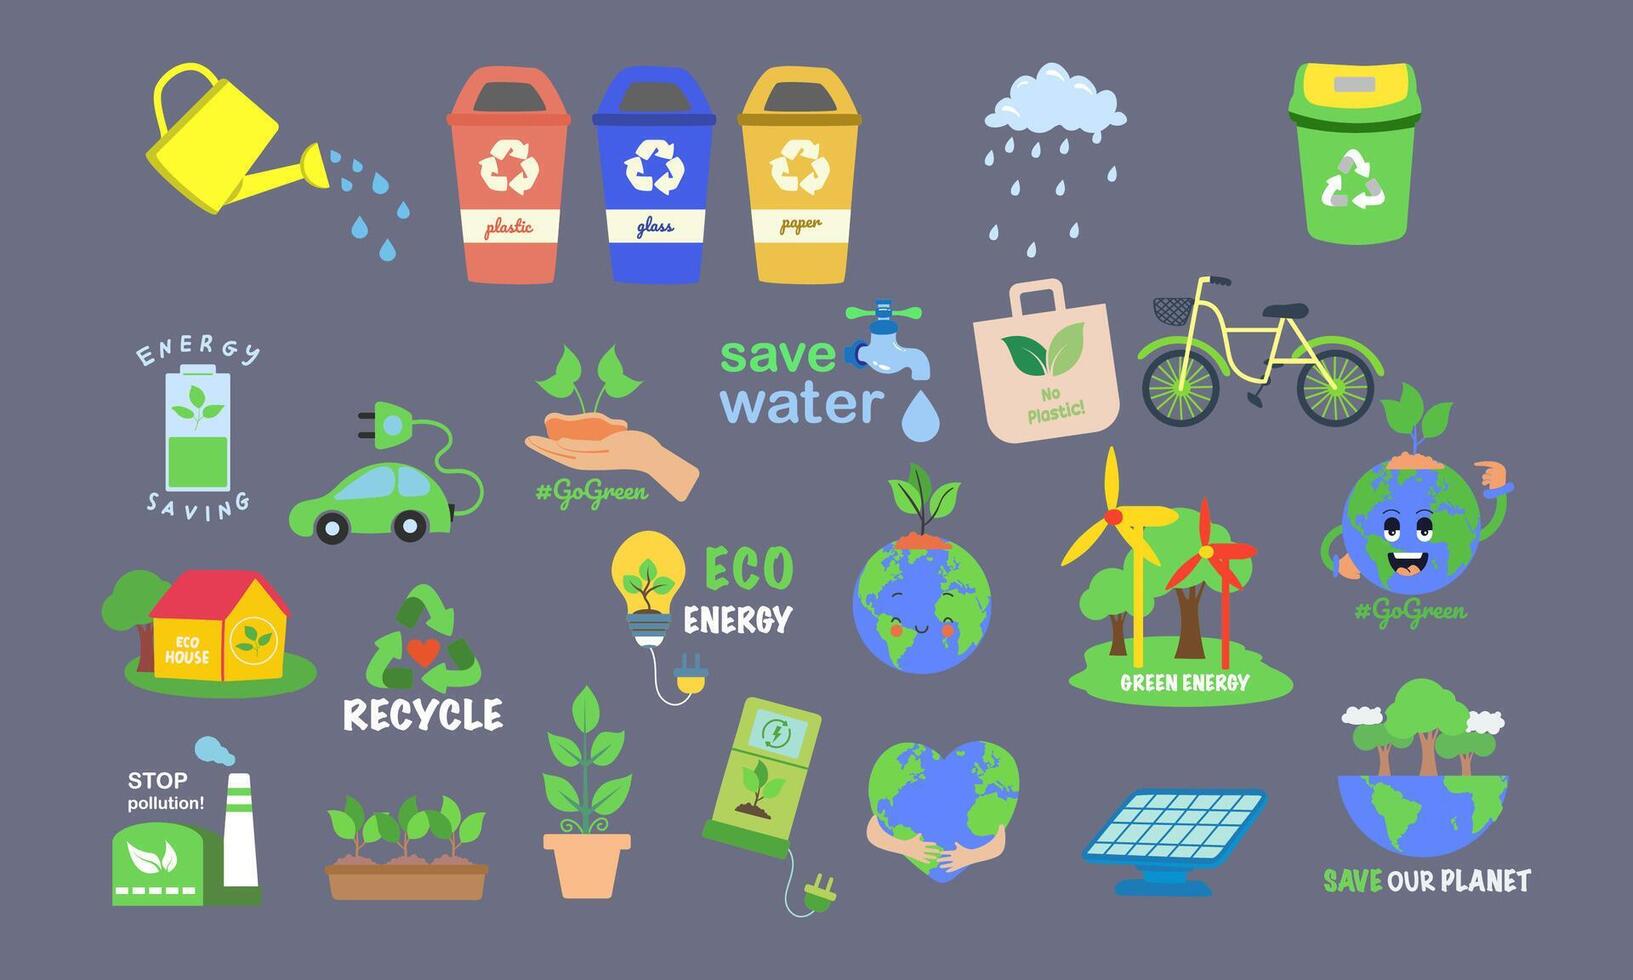 Ecology icon set. Earth, environment, sustainability, nature, recycle, renewable energy such as Electric bike and car, eco-friendly, wind power, green symbol. Solid icons vector collection